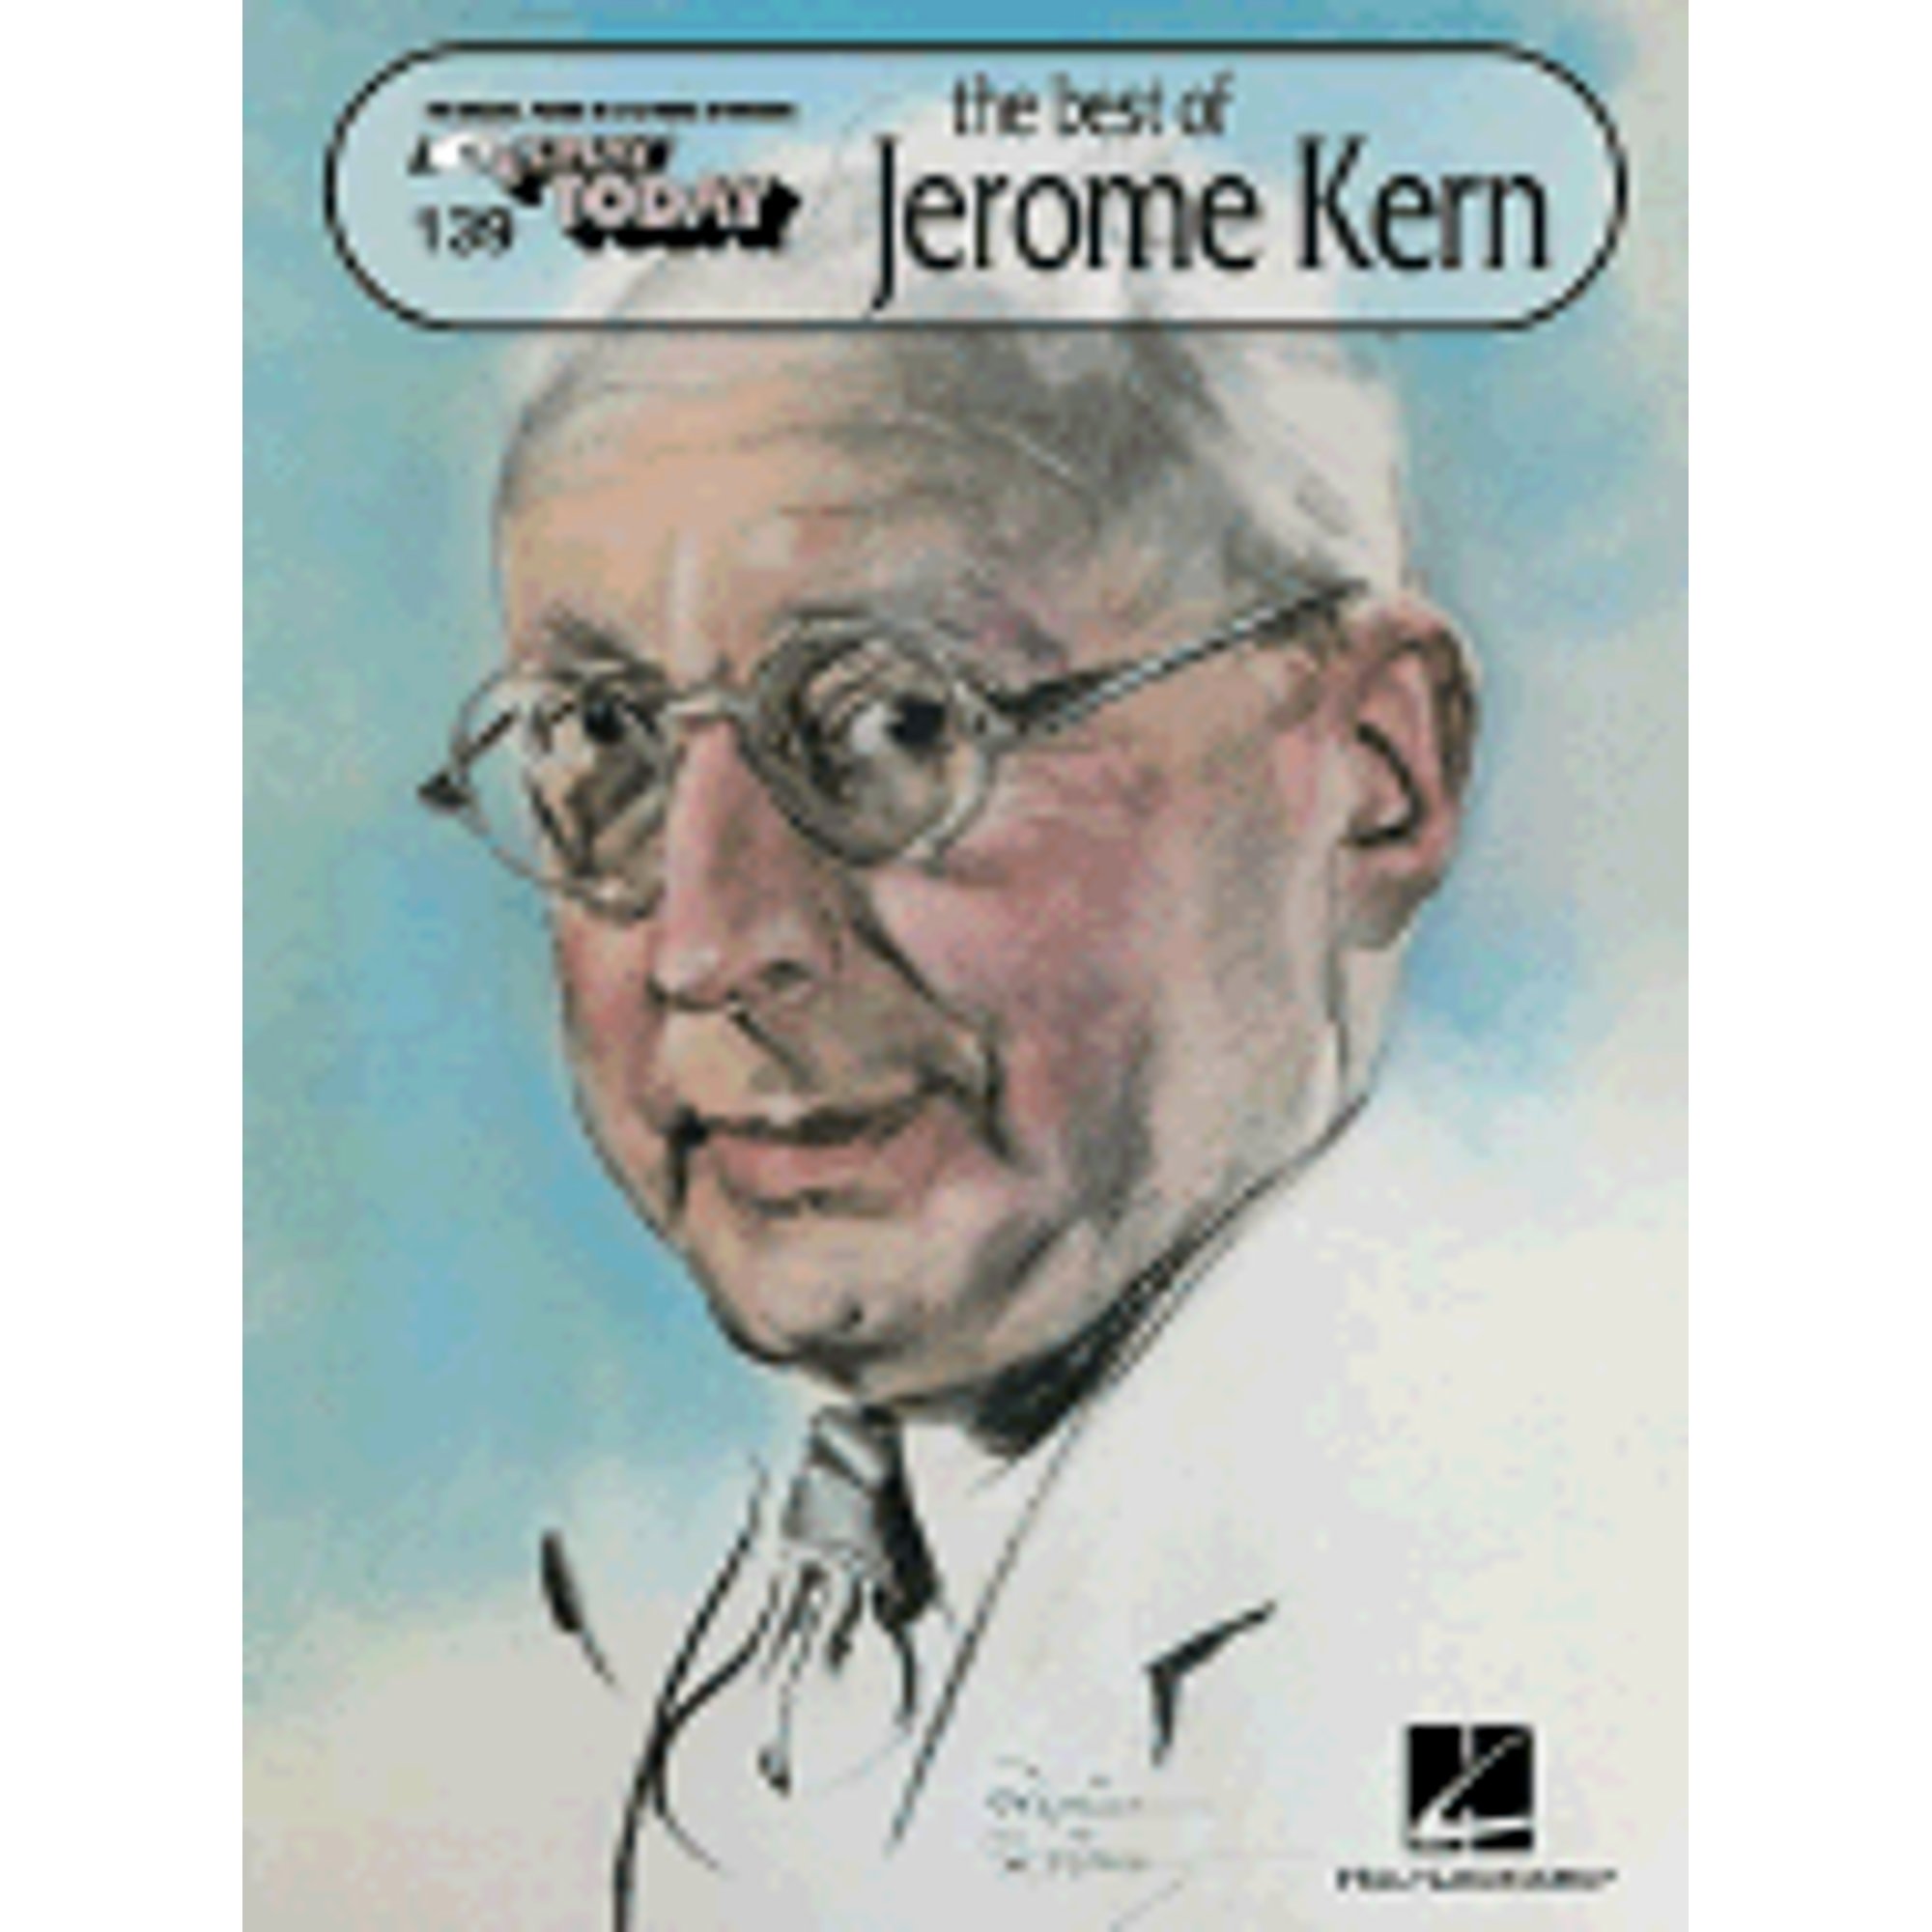 The best of jerome kern e